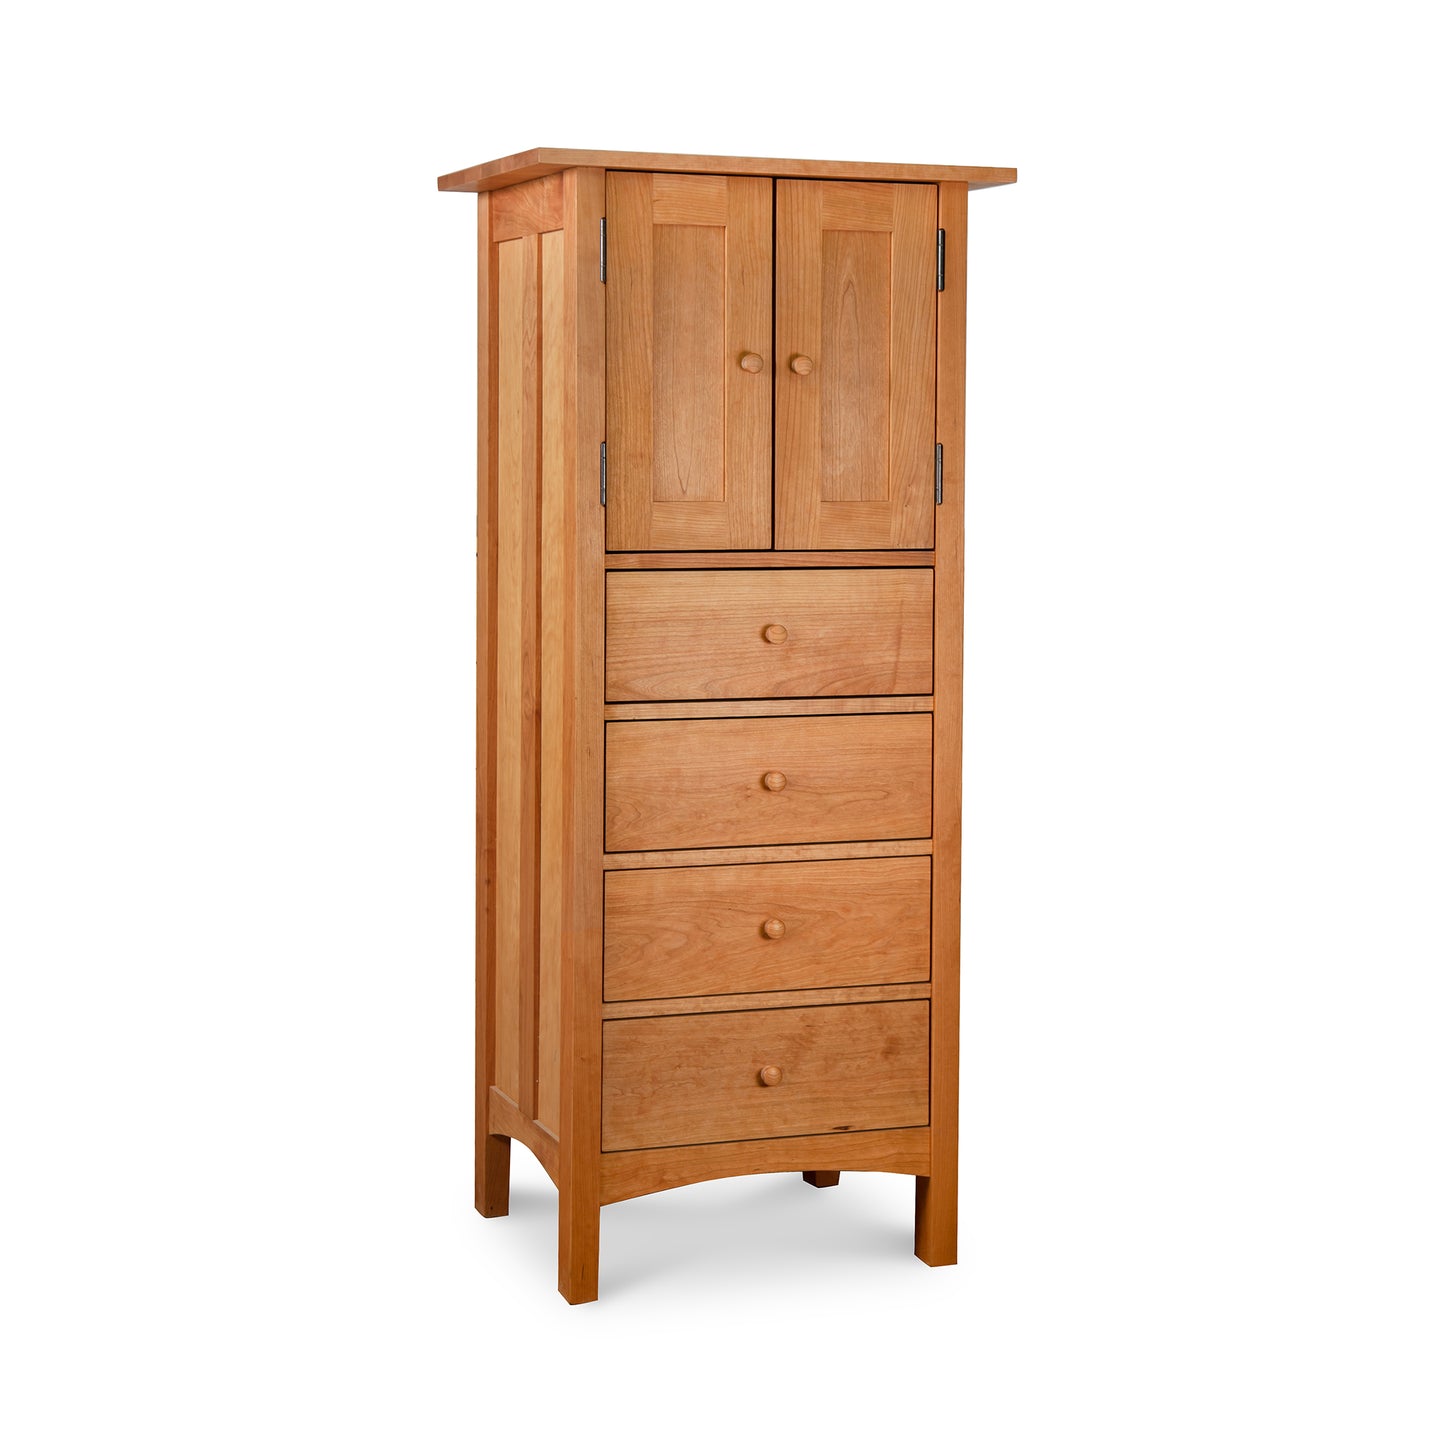 A tall Vermont Furniture Designs Burlington Shaker Style wooden lingerie chest with a cabinet door on top and five drawers beneath it, isolated on a white background.